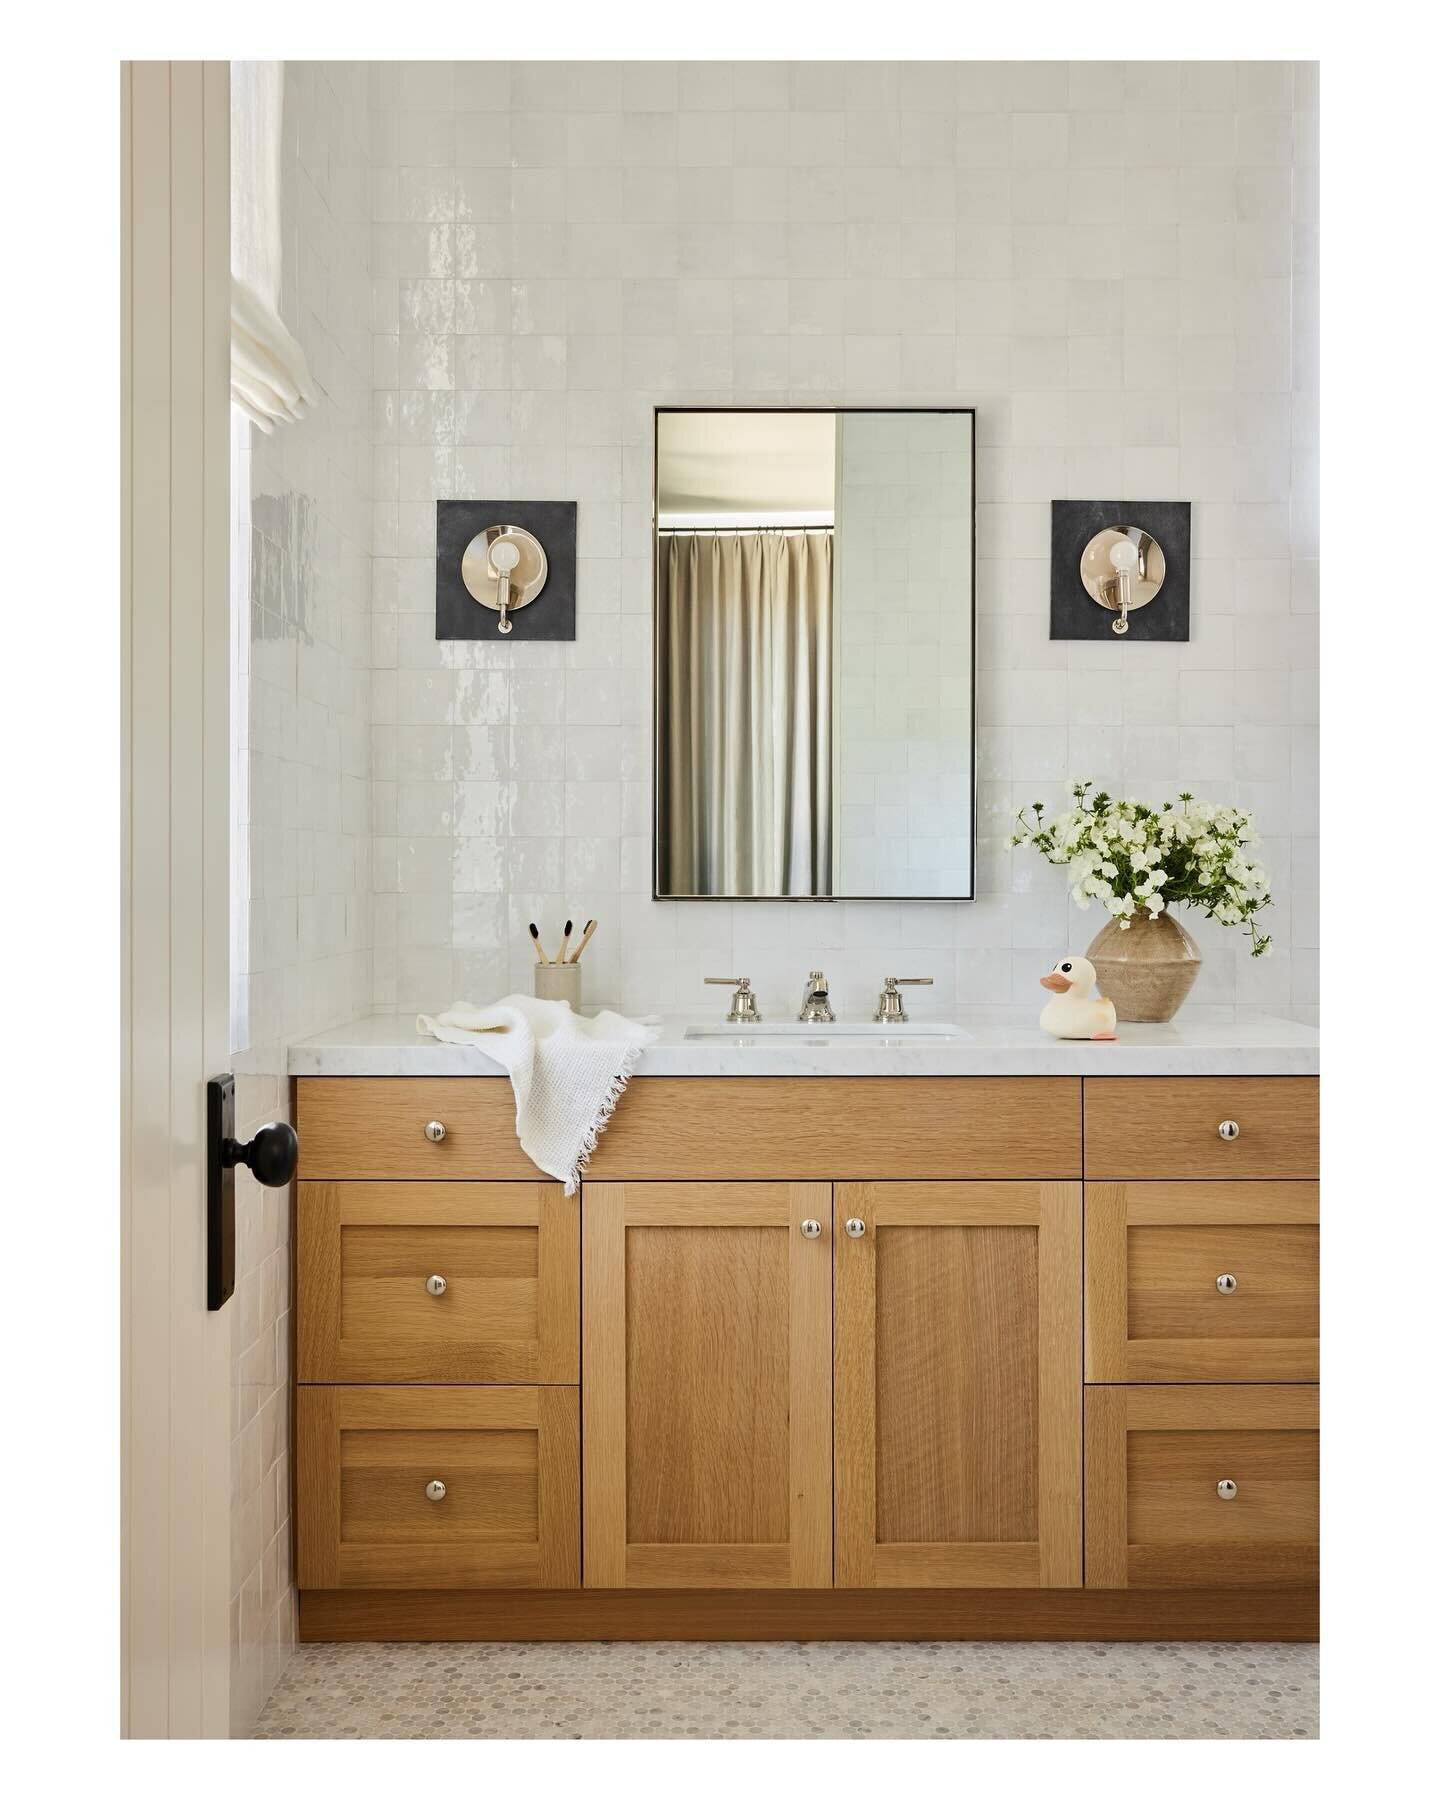 With two adorable and rambunctious little boys my client asked for &ldquo;chic but wipeable&rdquo; (the eternal family design brief? :) for her older sons bathroom so we tiled all the walls and did grey marble penny tiles on the floor. 

Interiors @l